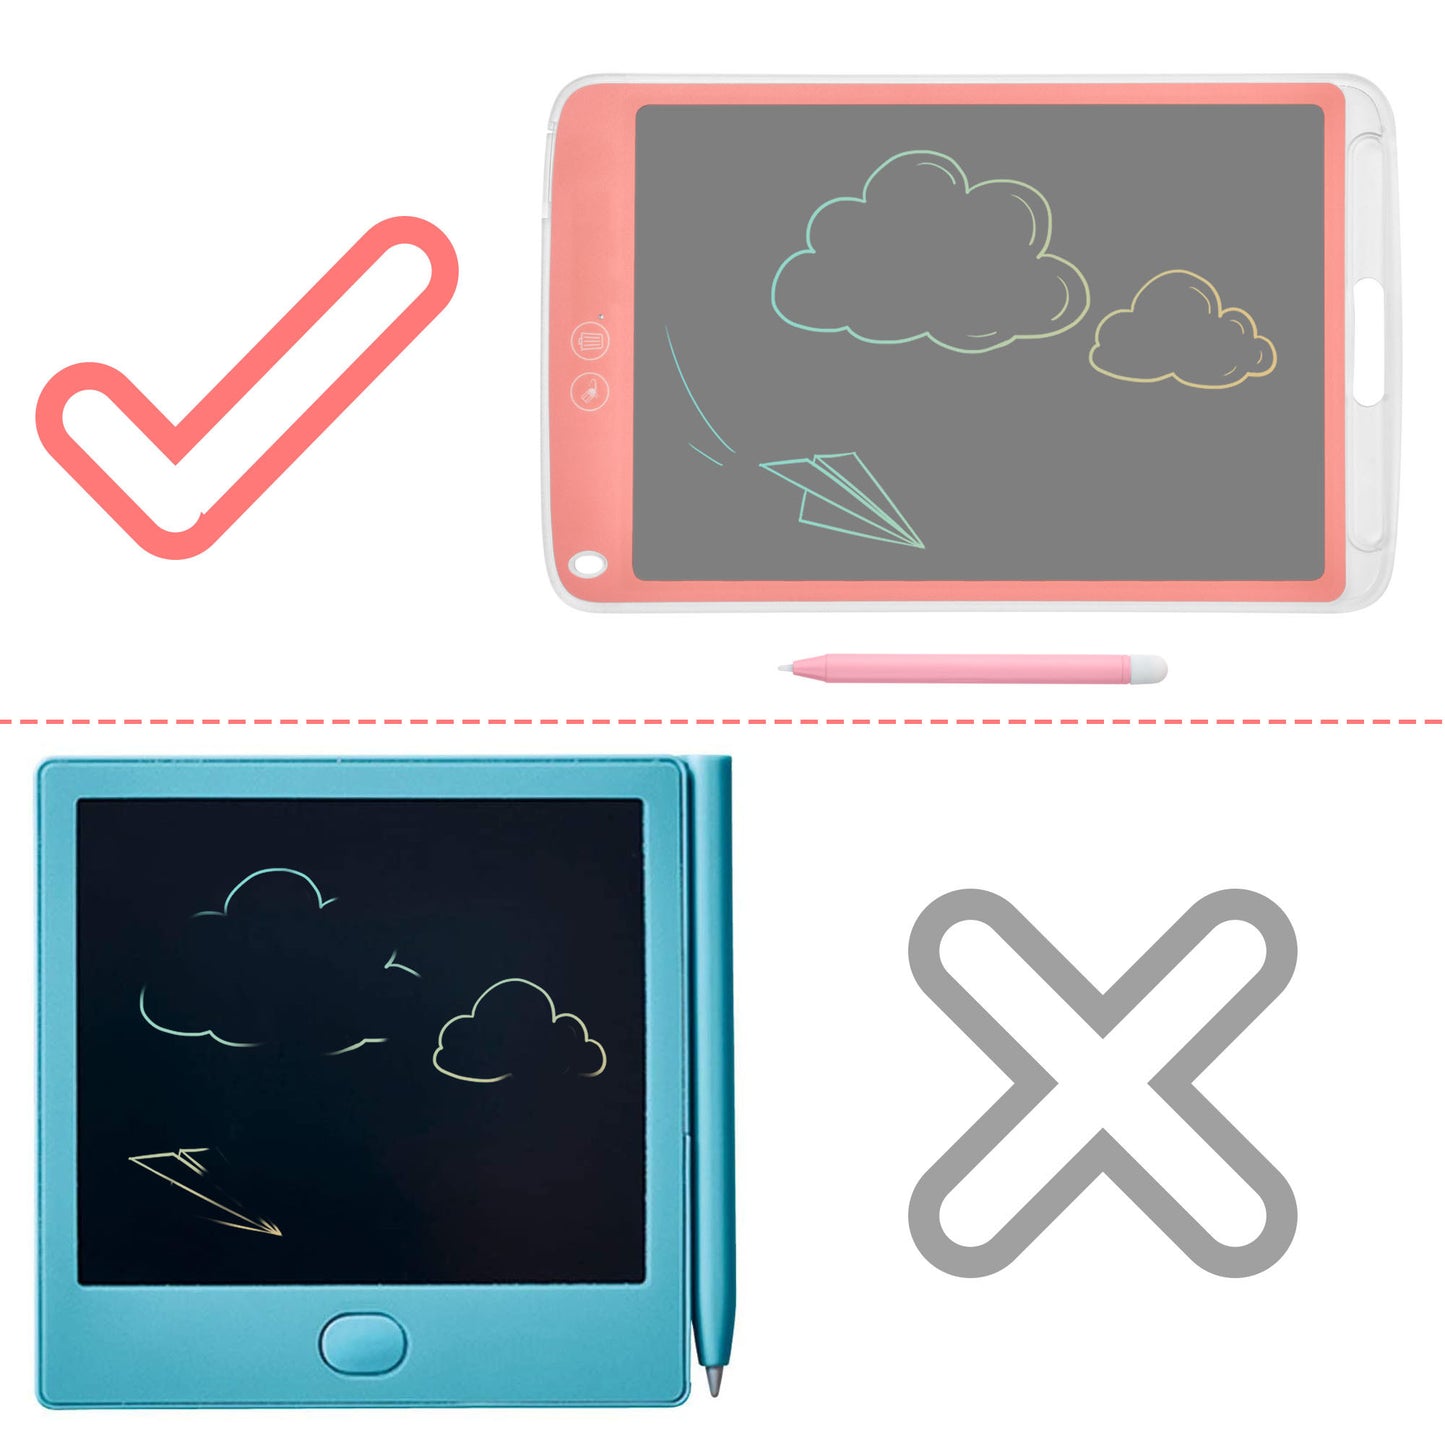 10inch Colorful LCD Writing Pad